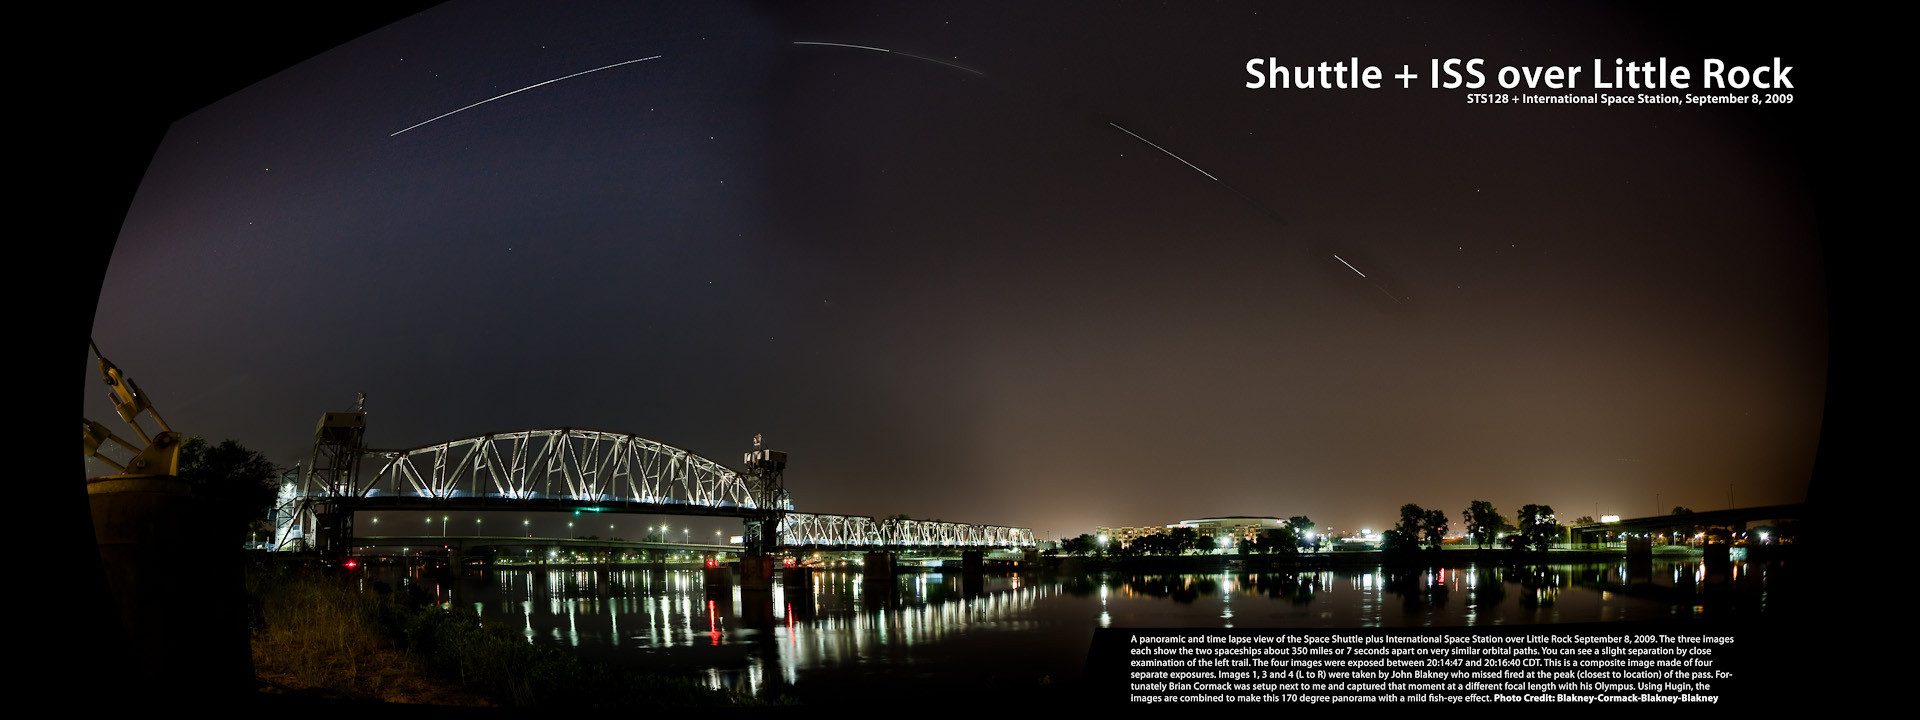 STS128 + ISS over Little Rock. A panoramic and time lapse view of the Space Shuttle plus International Space Station over Little Rock September 8, 2009. The three images each show the two spaceships about 350 miles or 7 seconds apart on very similar orbital paths. You can see a slight separation by close examination of the left trail. The four images were exposed between 20:14:47 and 20:16:40 CDT. This is a composite image made of four separate exposures. Images 1, 3 and 4 (L to R) were taken by John Blakney who missed fired at the peak (closest to location) of the pass. Fortunately Brian Cormack was setup next to me and captured that moment at a different focal length with his Olympus. Using Hugin, the images are combined to make this 170 degree panorama with a mild fish-eye effect. Photo Credit: Blakney-Cormack-Blakney-Blakney.